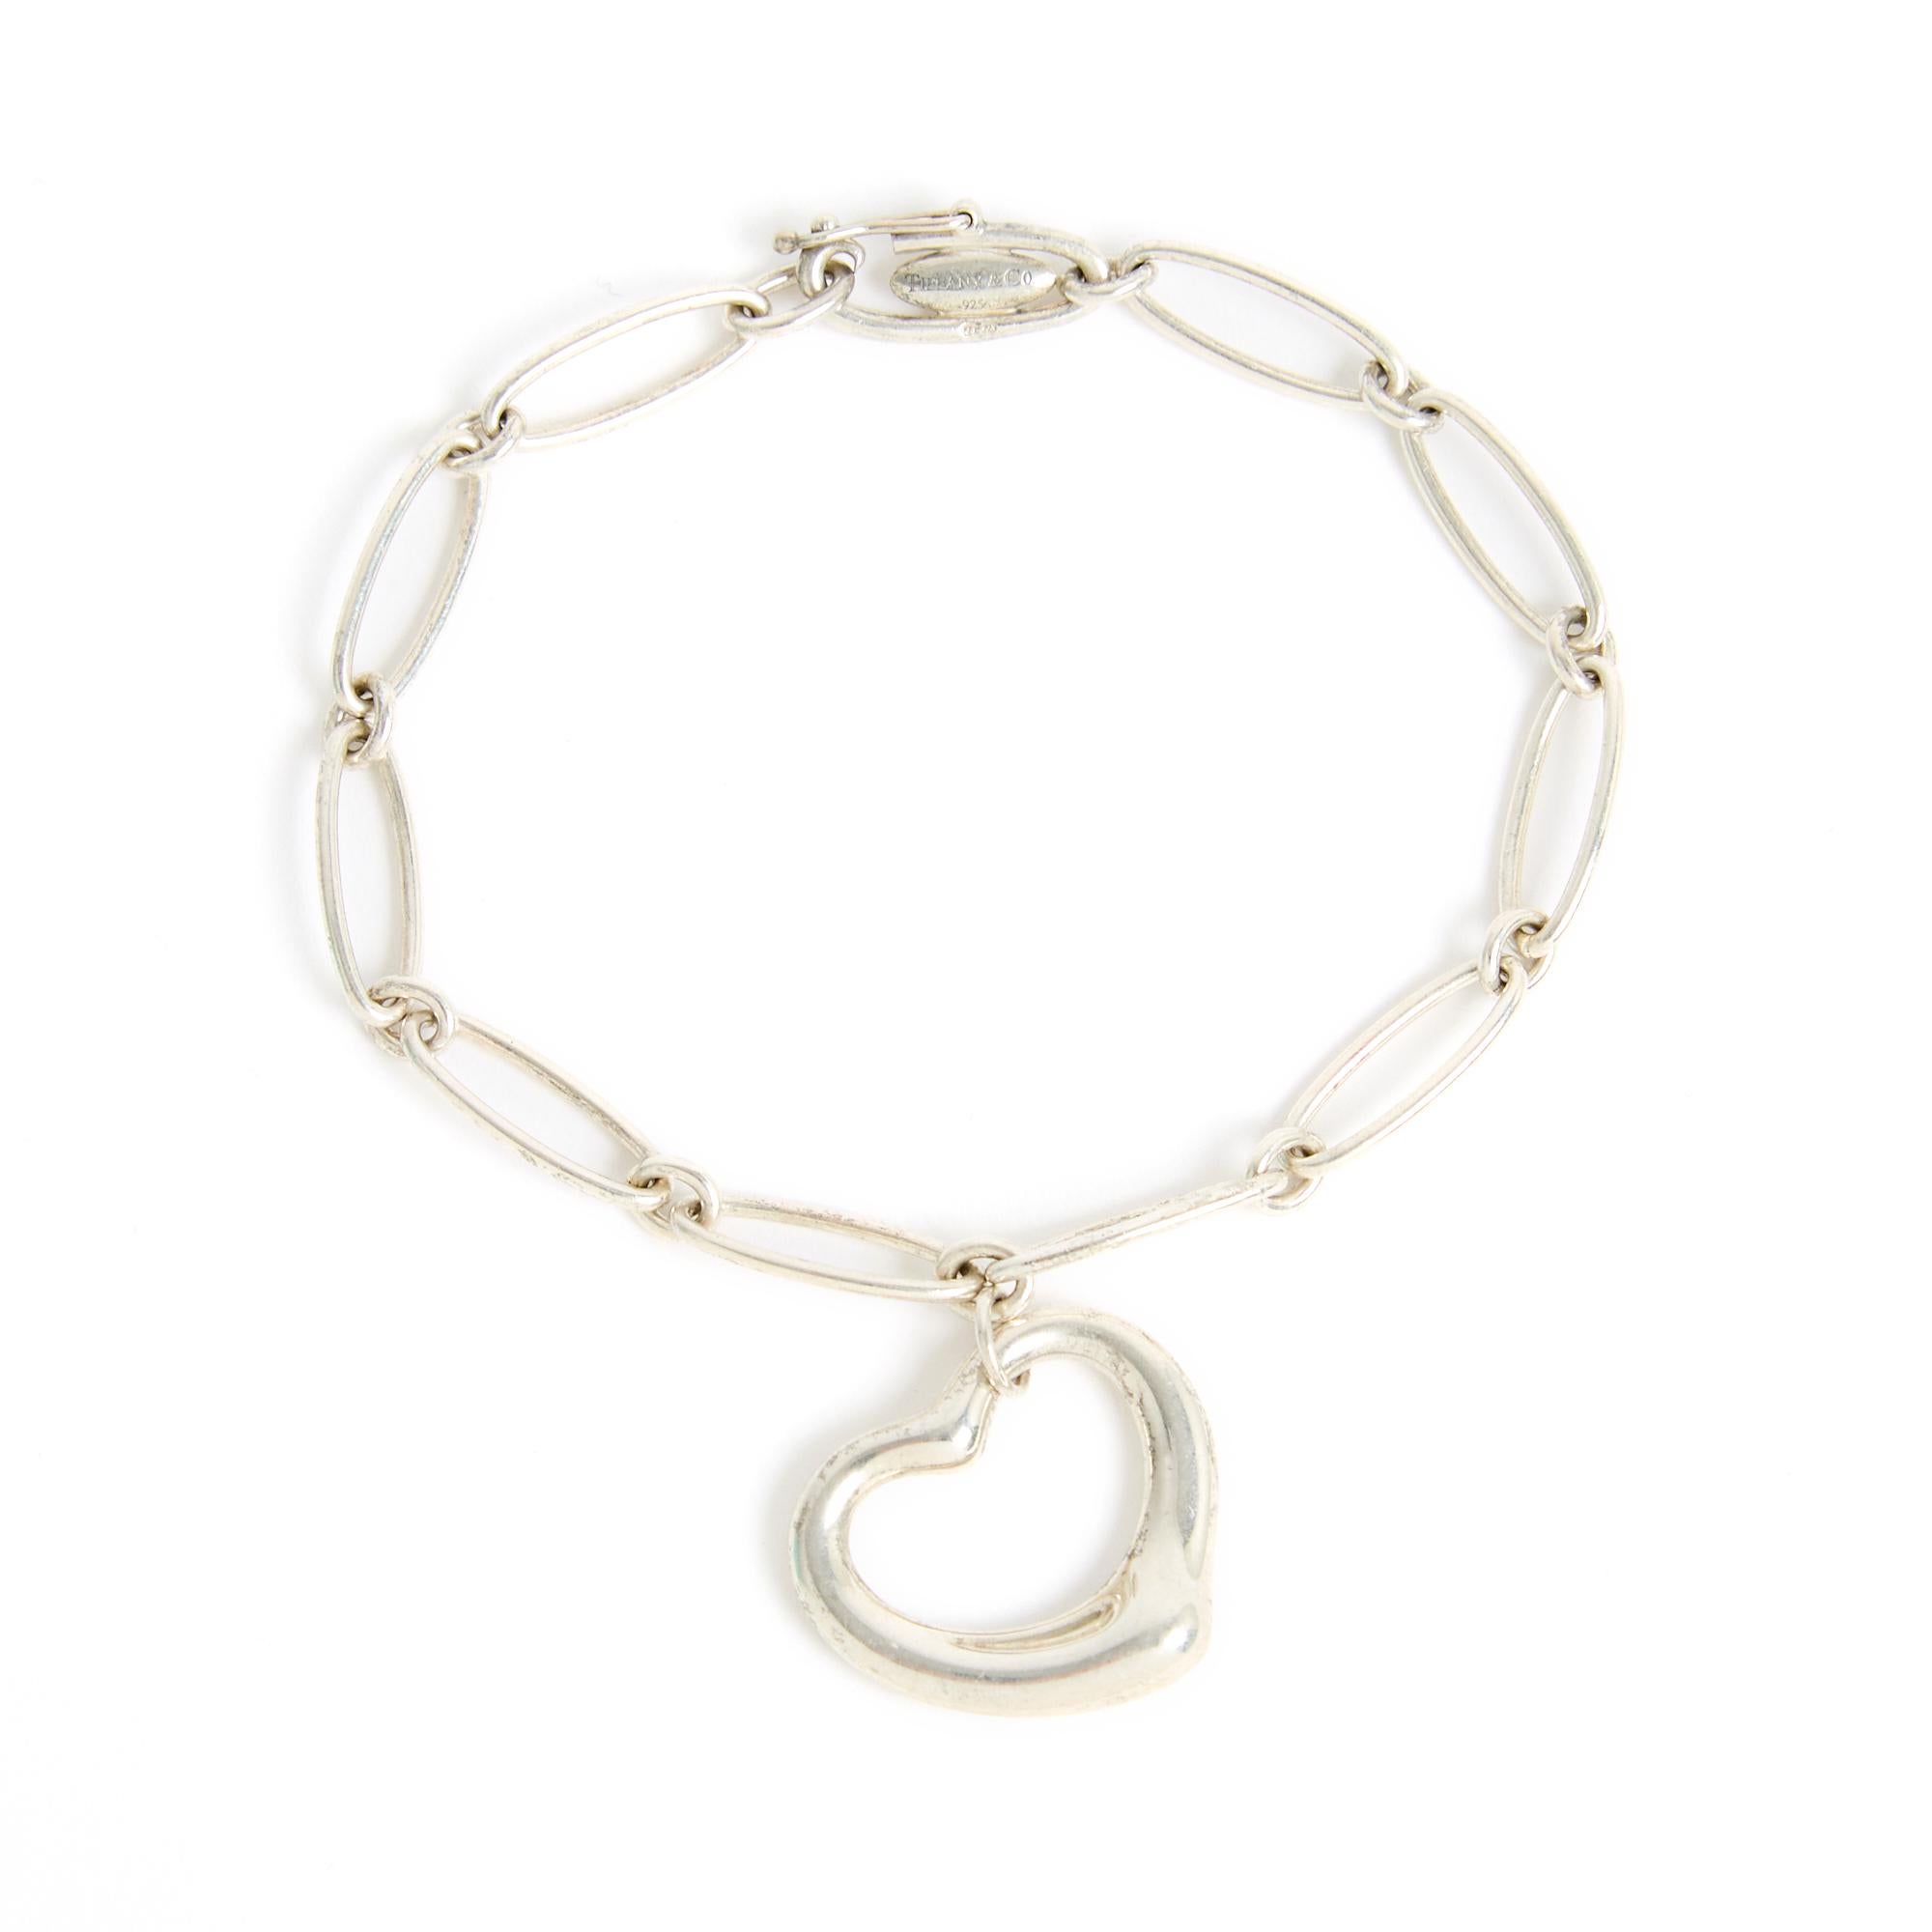 Tiffany&CO Open Heart model bracelet by Elsa Peretti in solid silver composed of a chain with elongated links and an Open Heart pendant, delivered in its original pouch and box. Length of the bracelet 18.5 cm, dimensions of the pendant 2.25 x 1.95